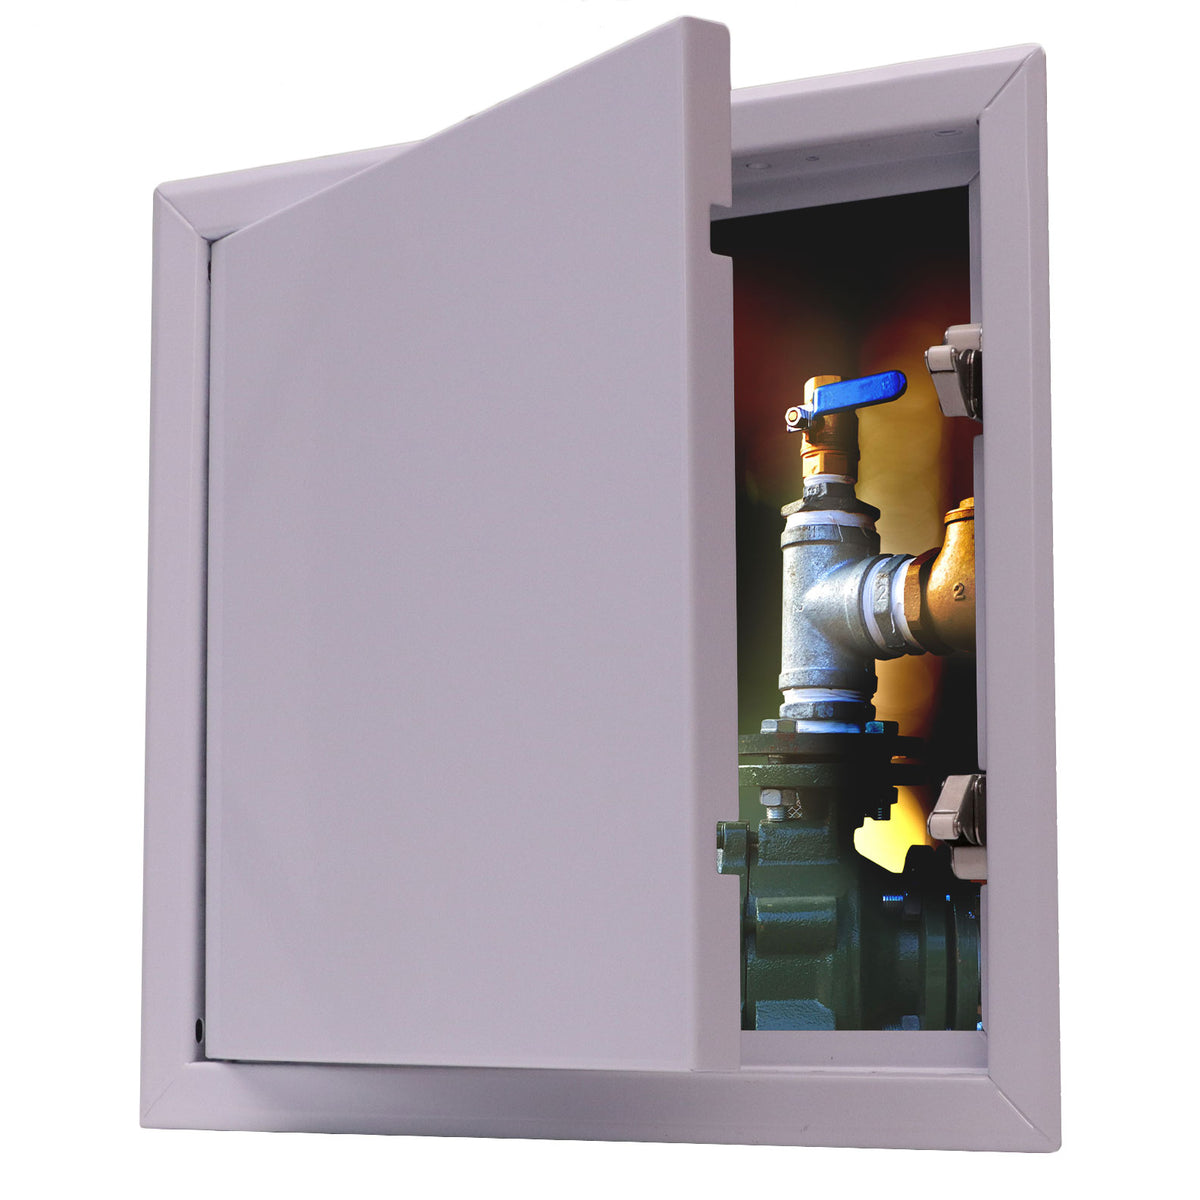 24&quot; X 24&quot; Universal Aluminum Access Panel Door For Wall / Ceiling Application (Push-Lock) With Solid Frame - [Outer Dimensions: 25&quot; Width X 25&quot; Height]